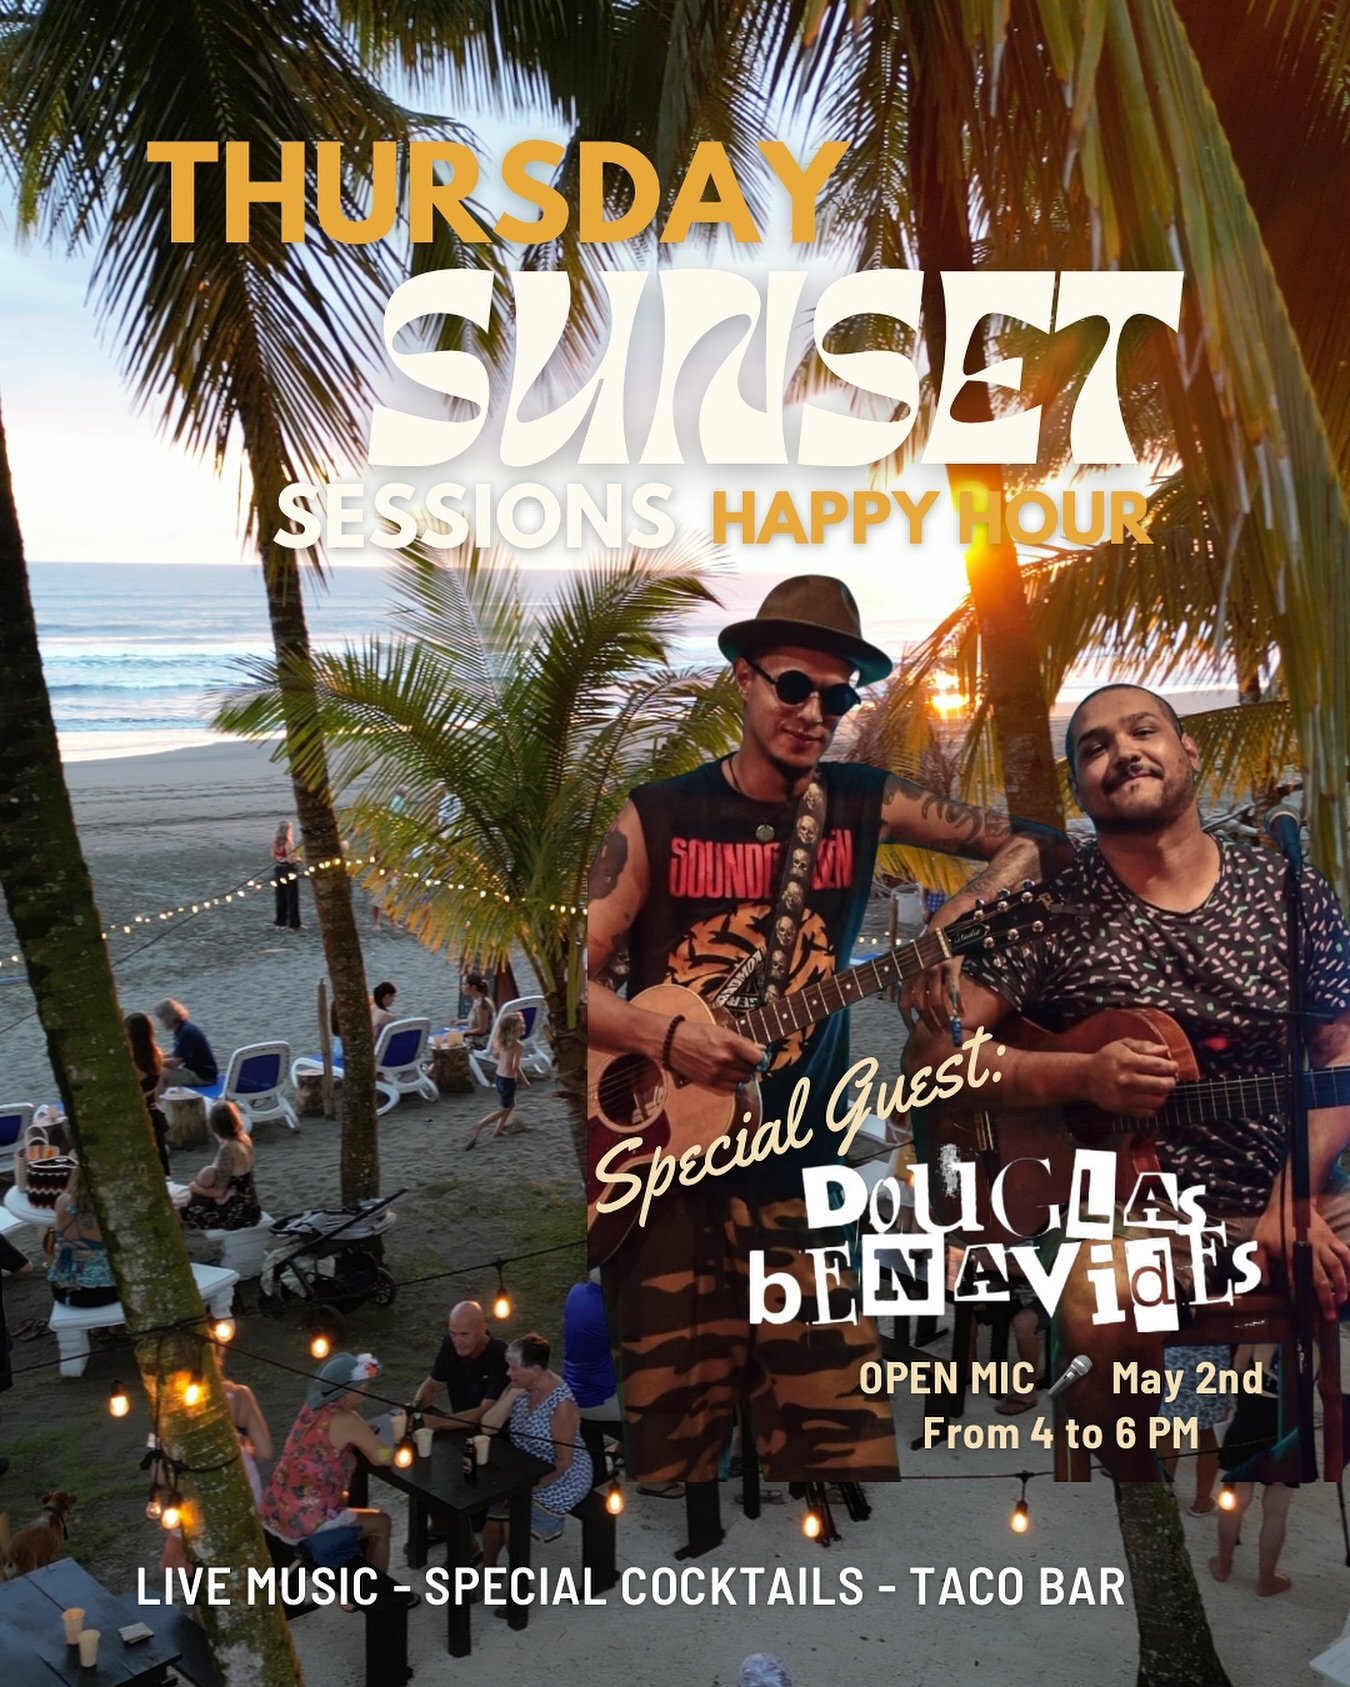 🎶✨ The green season is on the horizon, and we&rsquo;re sending off our Thursday Sunset Sessions Happy Hour in style! 

Join us for the last epic Sunset Session Happy Hour of the season, featuring the soulful tunes of @doubenavides18 🎷

🍹 Special C